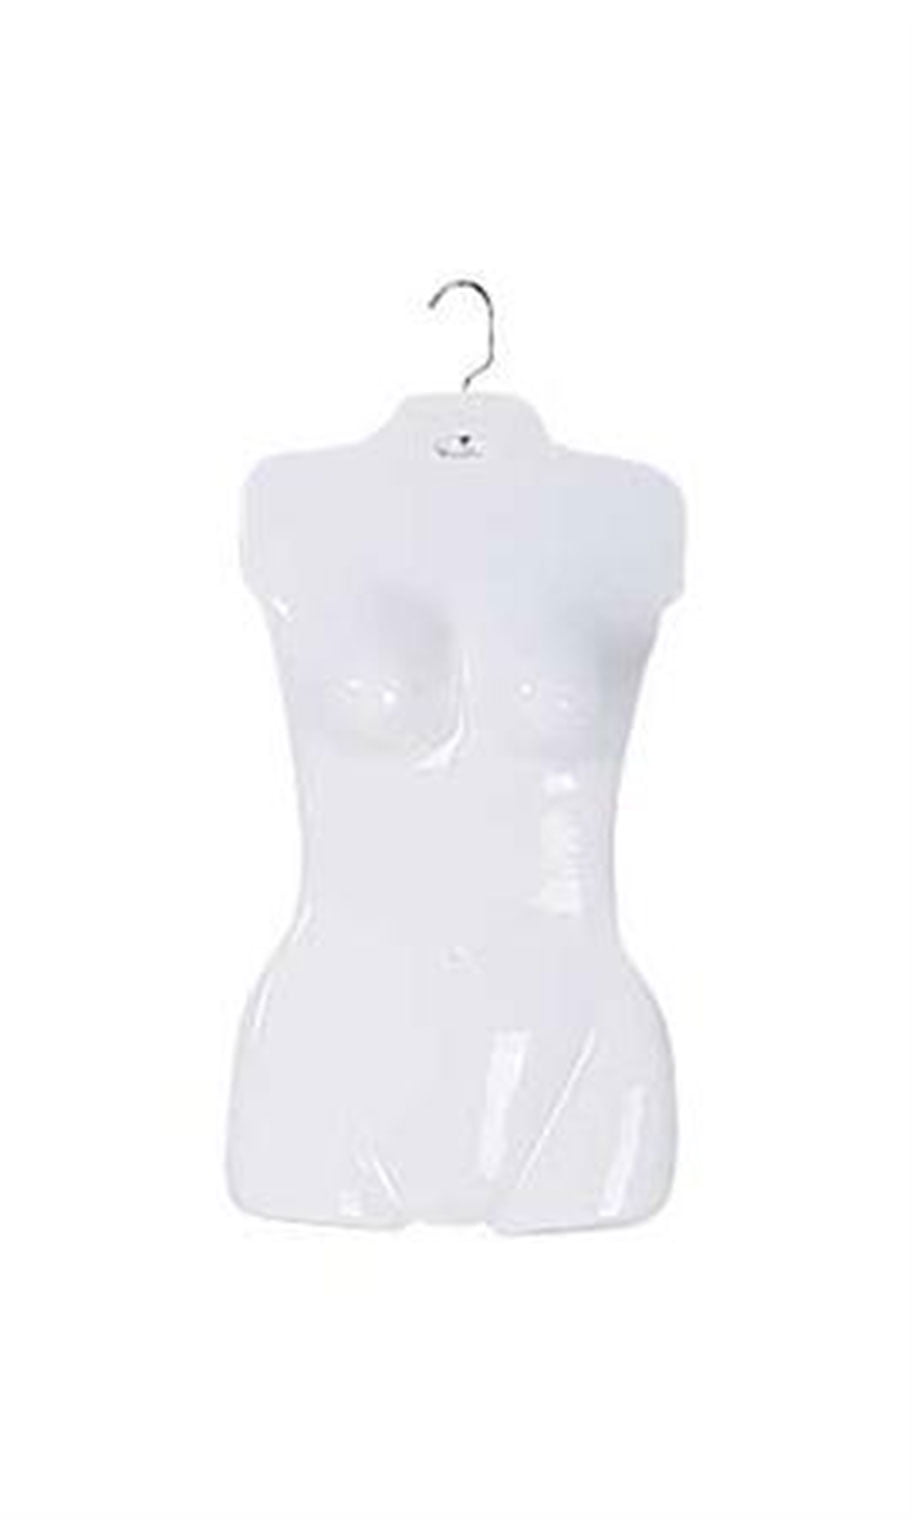 Molded Woman's Shirt Torso Form Fits 5 to 10 Hanging Female Mannequin White 